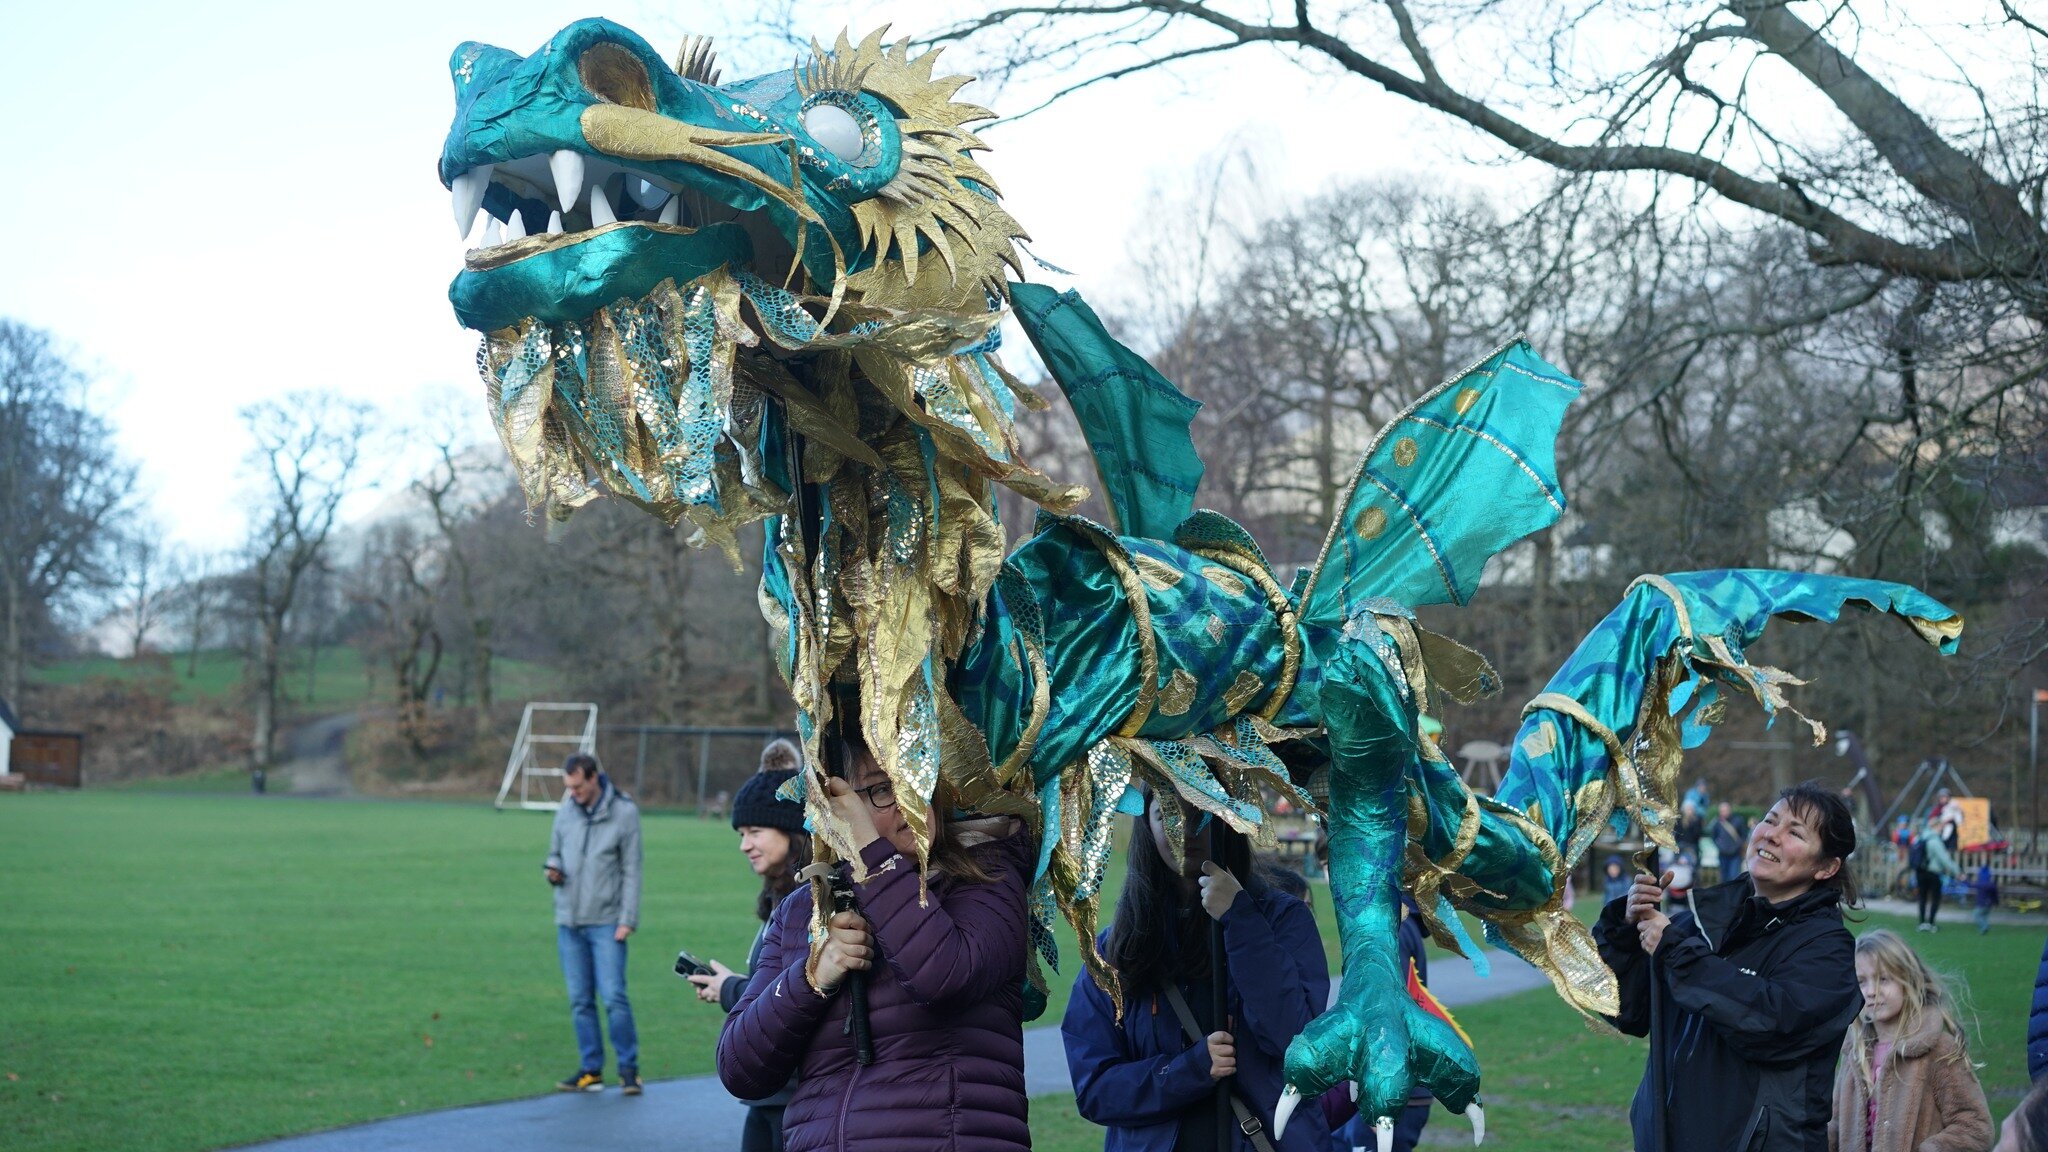 👉Check out these wonderful activities organized by Keswick Alhambra Cinema @keswick_alhambra_cinema, Keswick Museum @keswickmuseum , and local resident Yen Yen during the Mint CFF to celebrate the Year of the Dragon. 🐲Dragon Parade, ☯️Tai Chi and ?